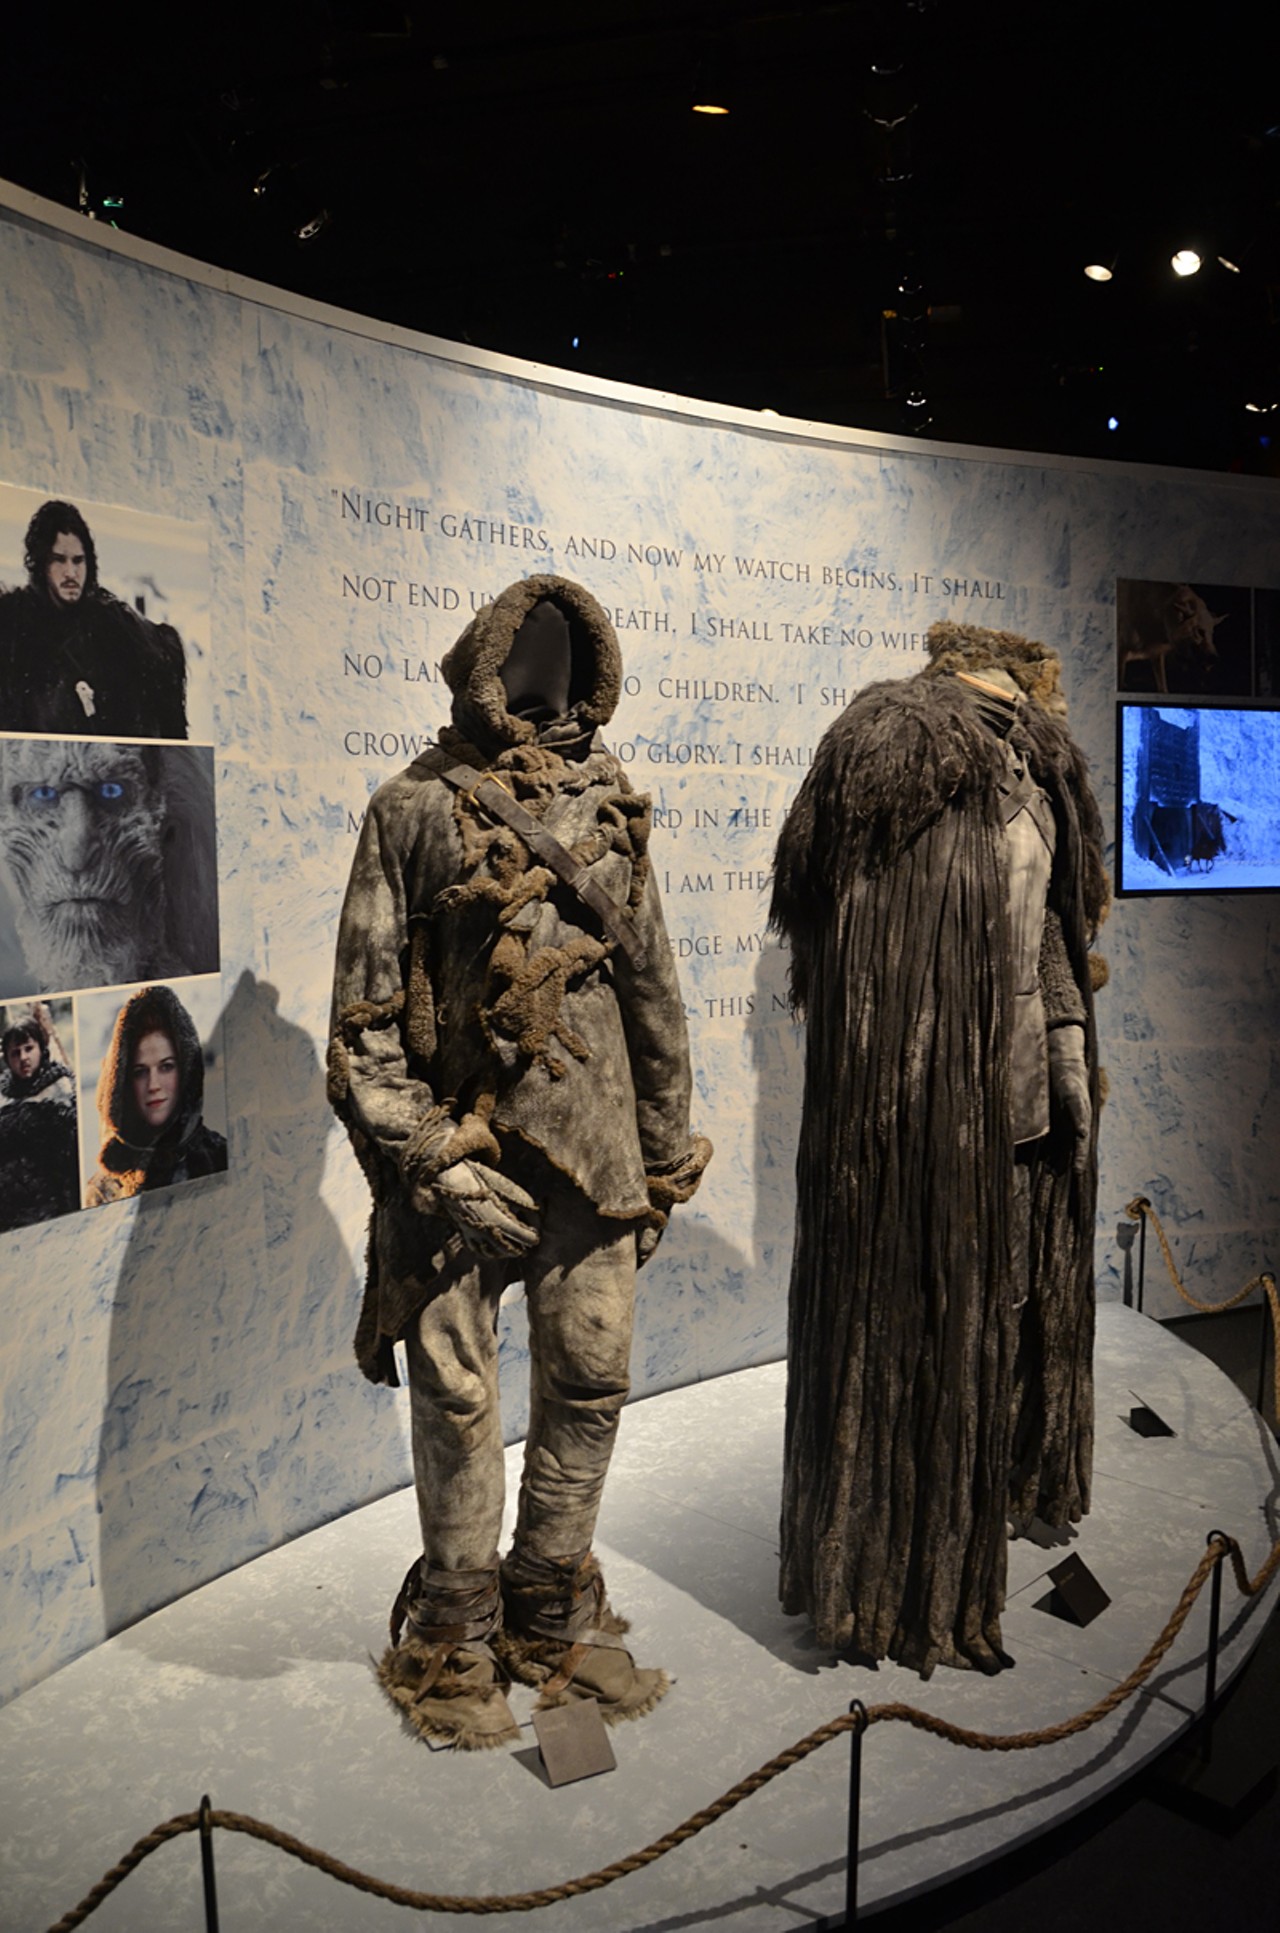 The exhibit displayed costumes for Jon Snow and the wildling, Ygritte.